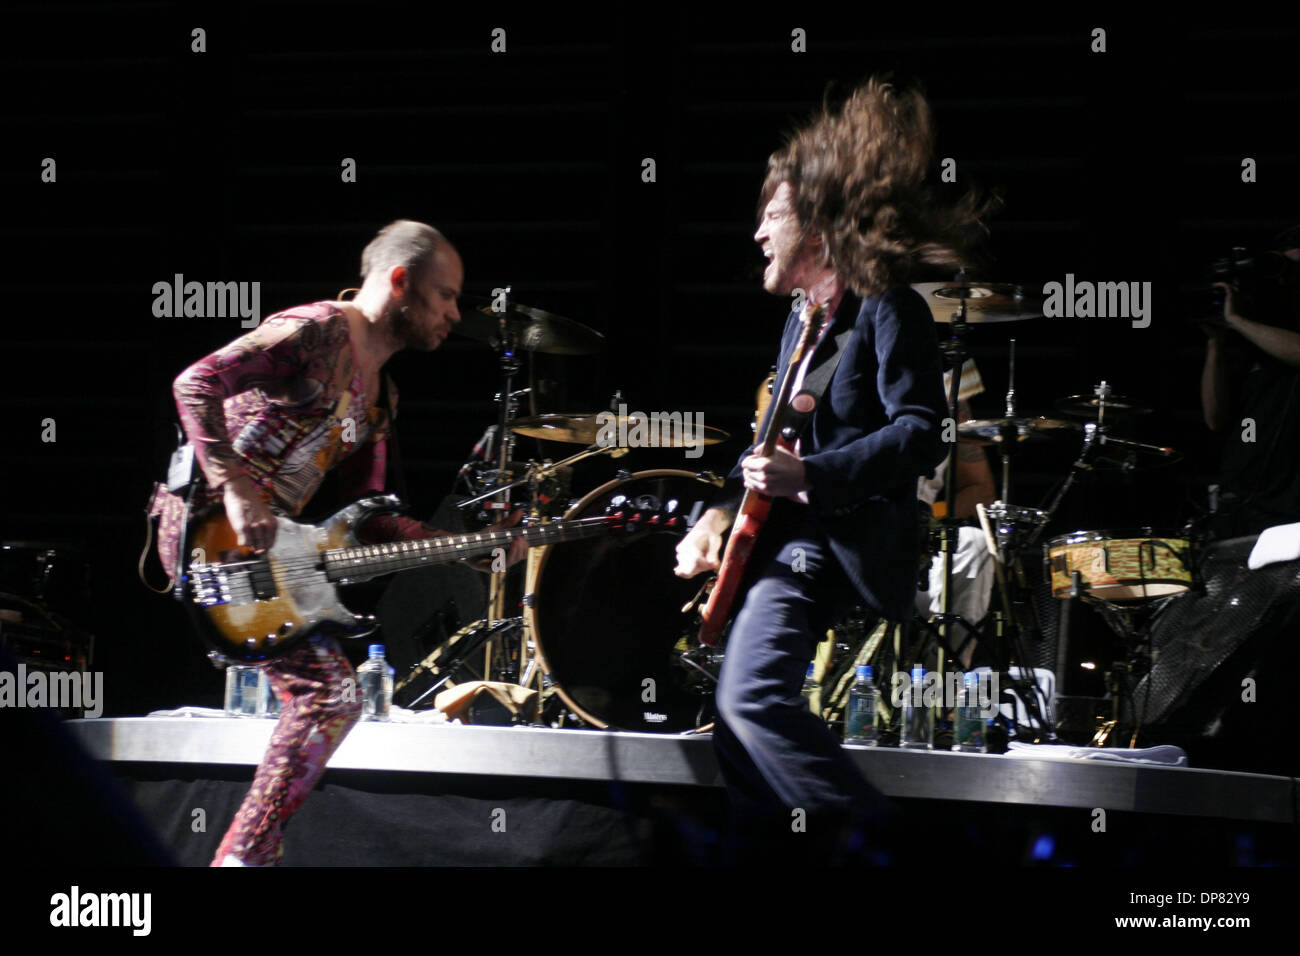 Oct 17, 2006 - New York, NY, USA - 'Red Hot Chili Peppers' performing at Continental Airlines Arena. JOHN FRUSCIANTE - lead guitar and Michael Balzary aka FLEA on bass. Stock Photo